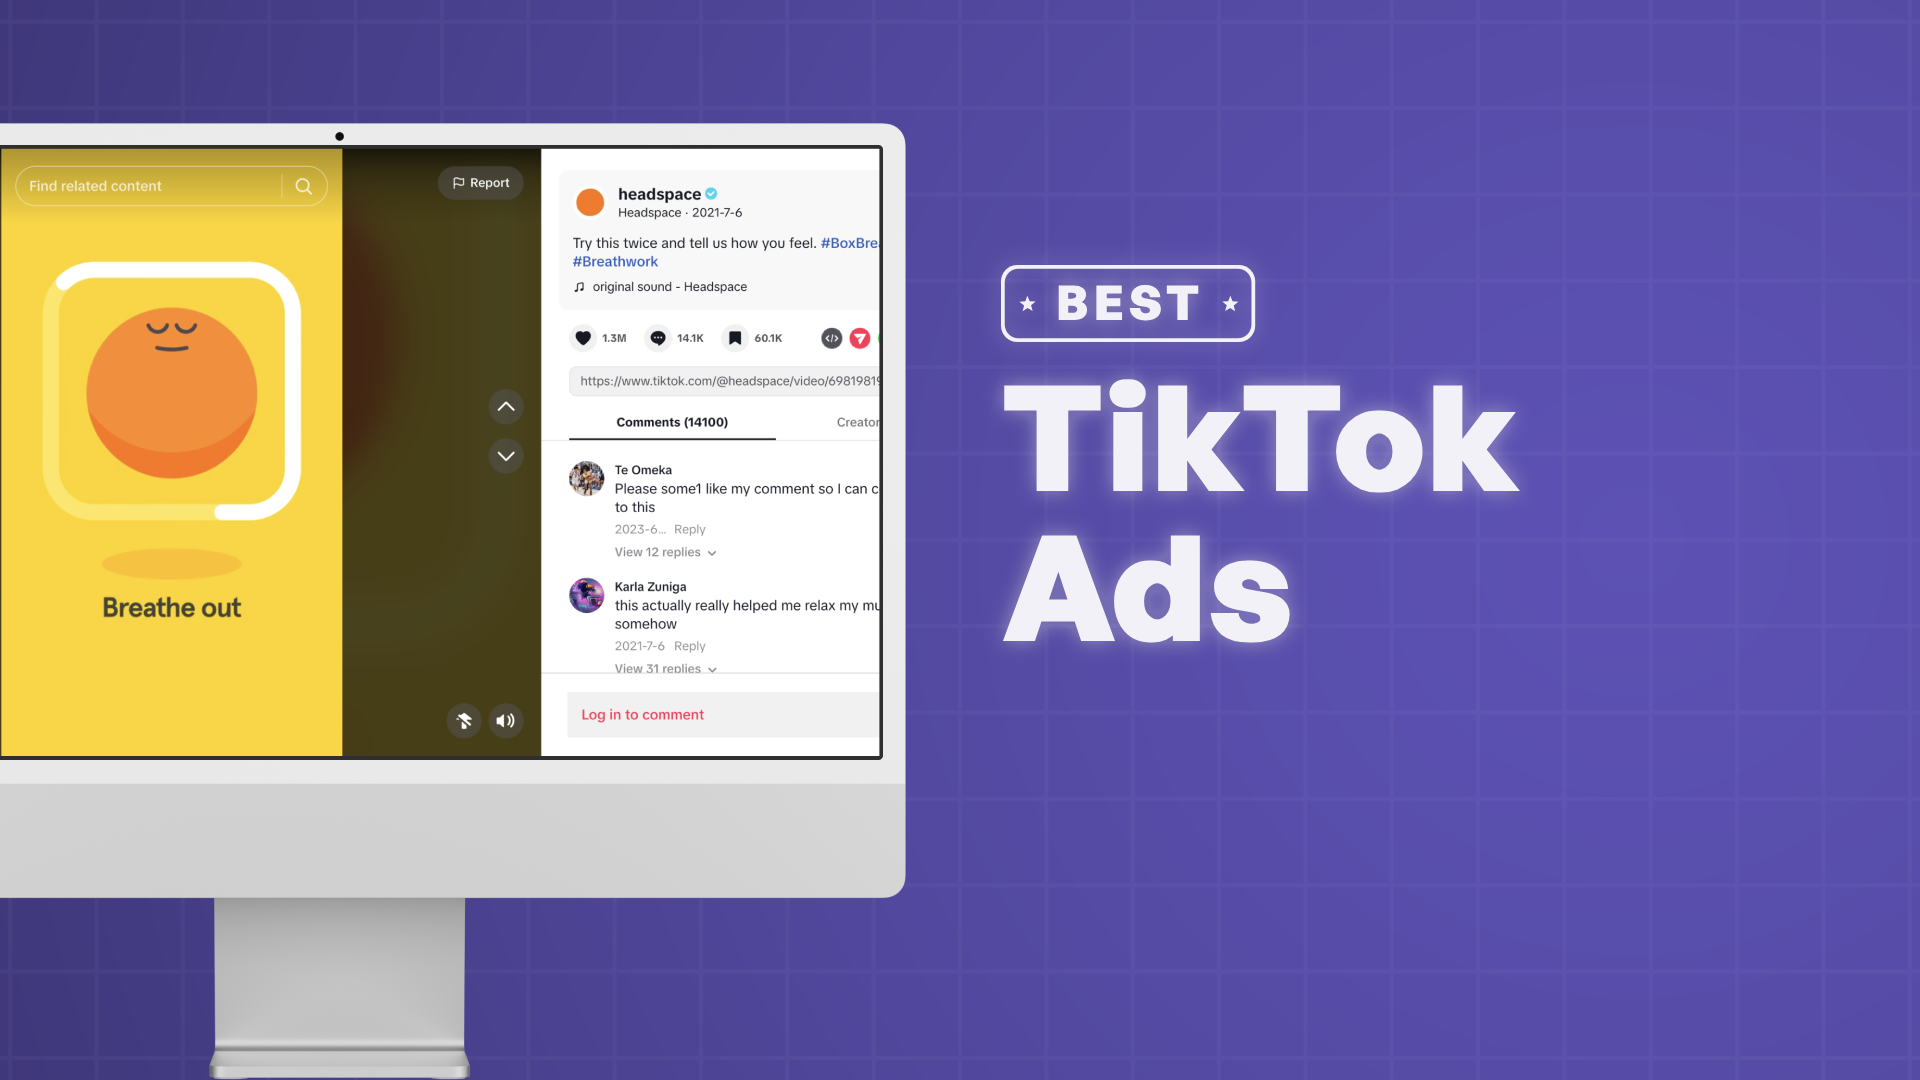 "Best TikTok Ads" with a screenshot of the TikTok ad examples